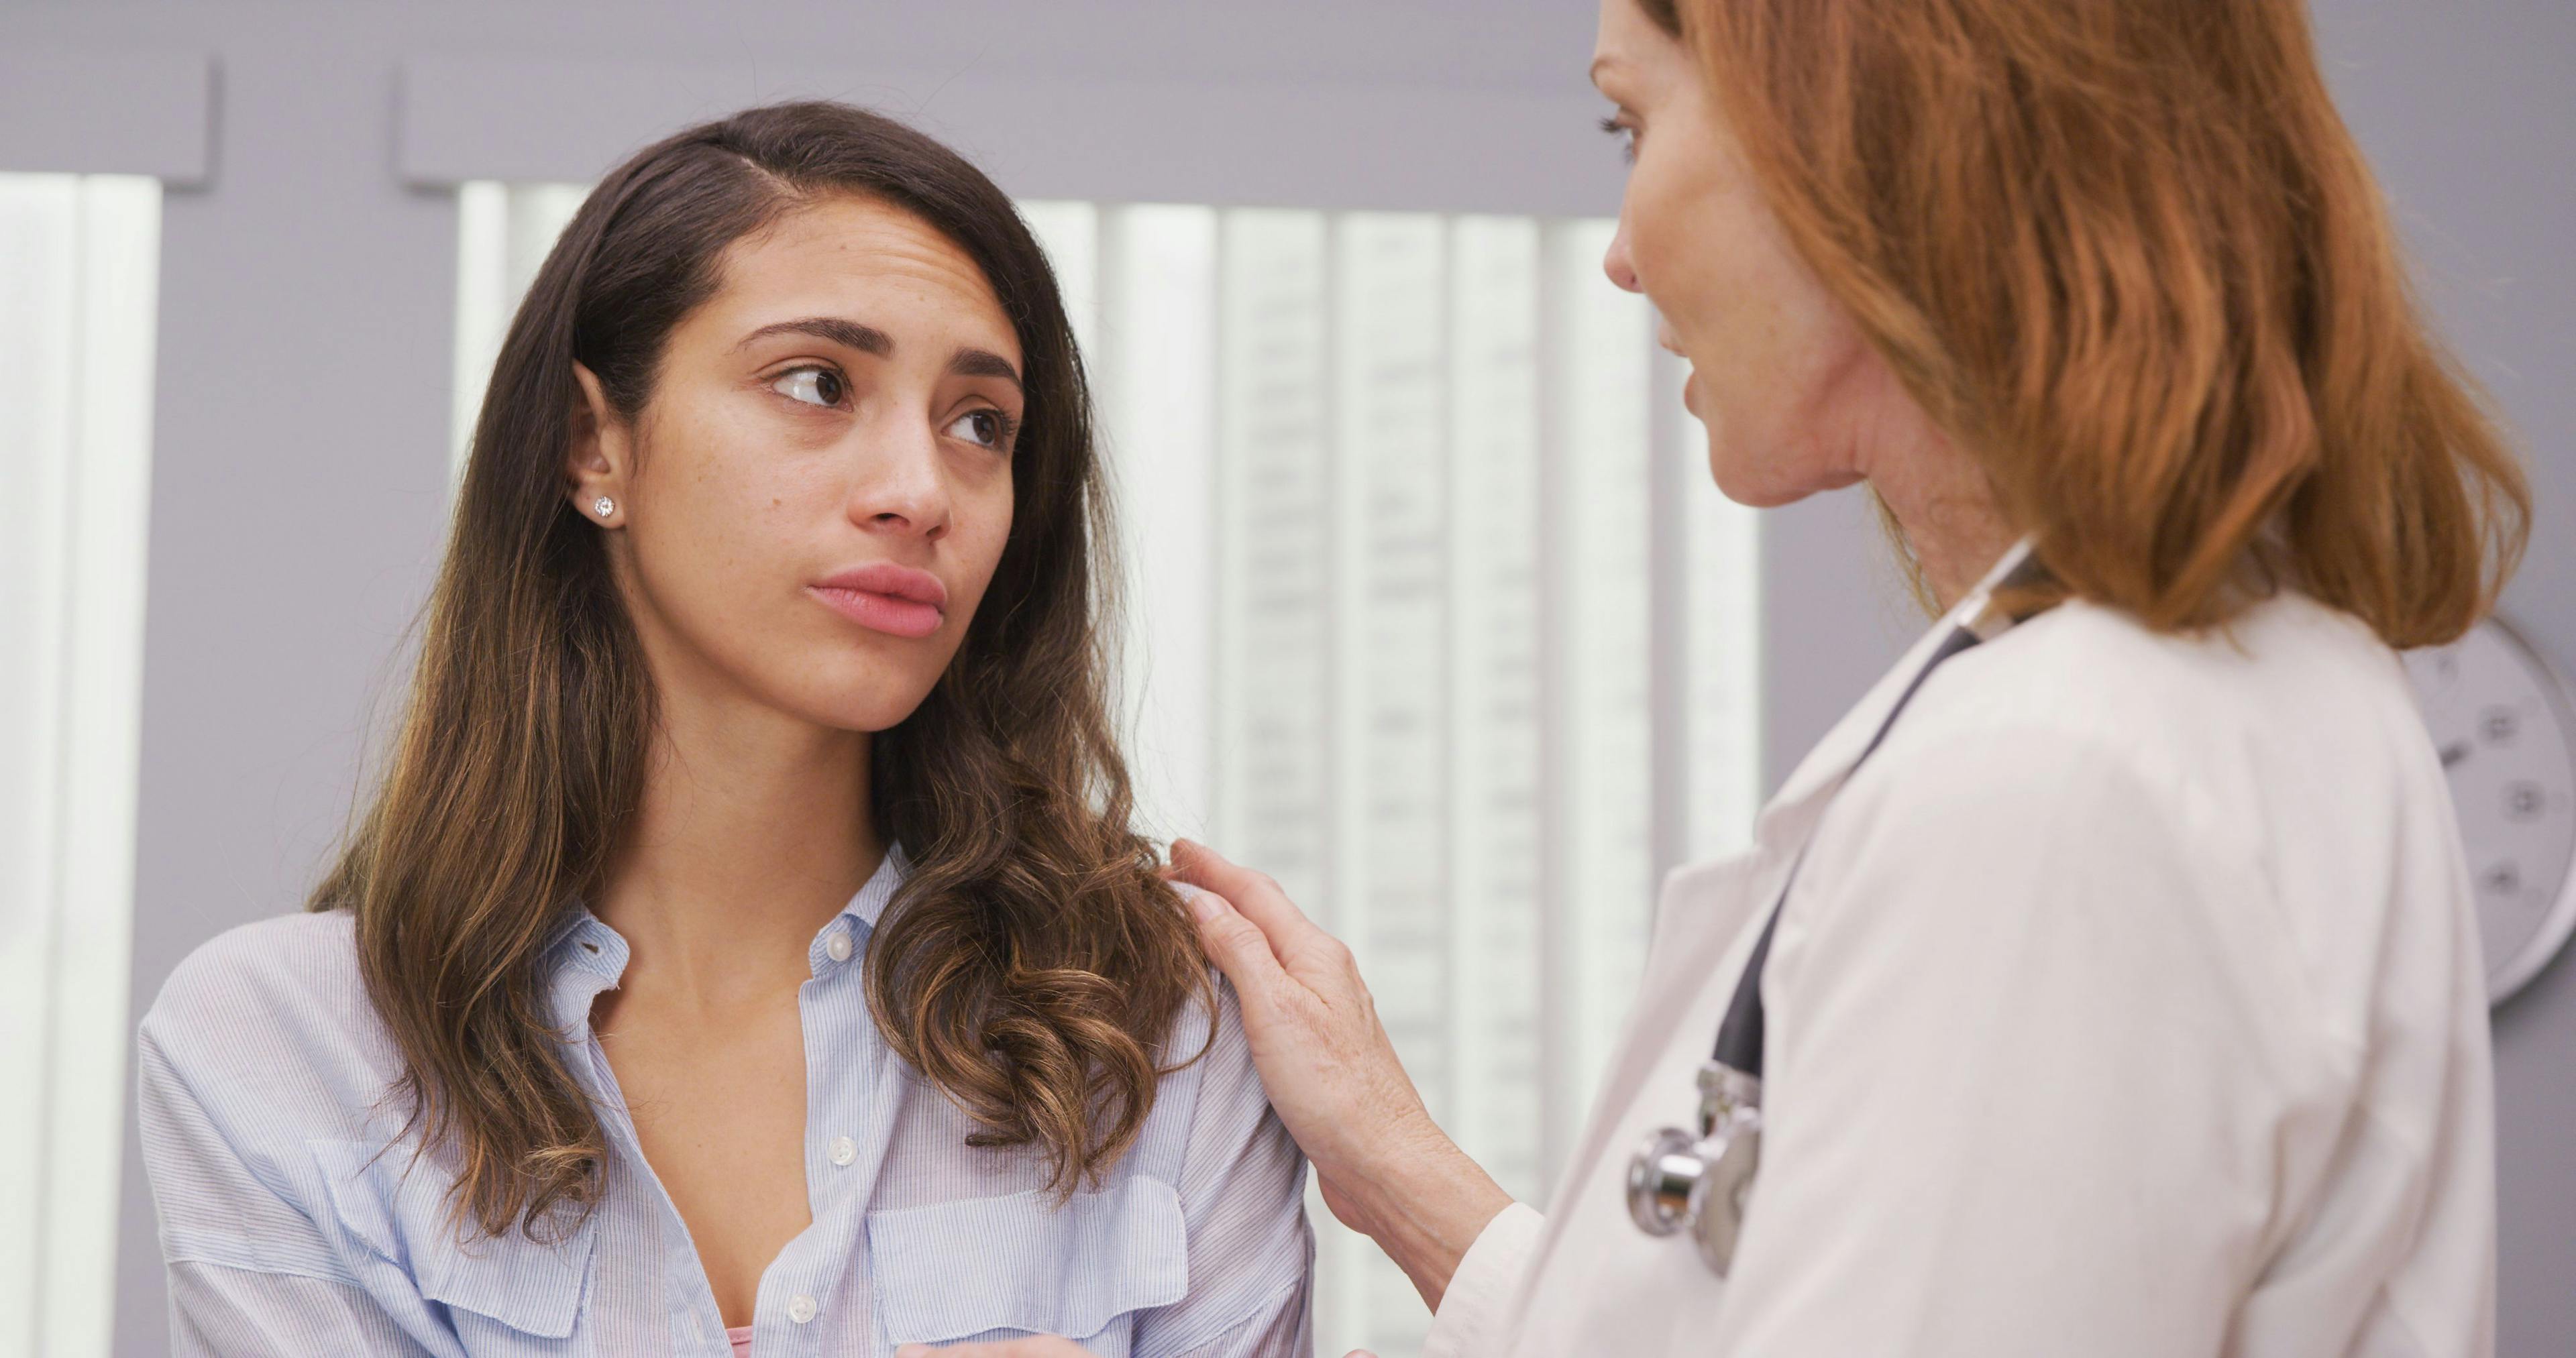 Addressing—and solving—2 of the biggest hurdles for patients in receiving mental health care.